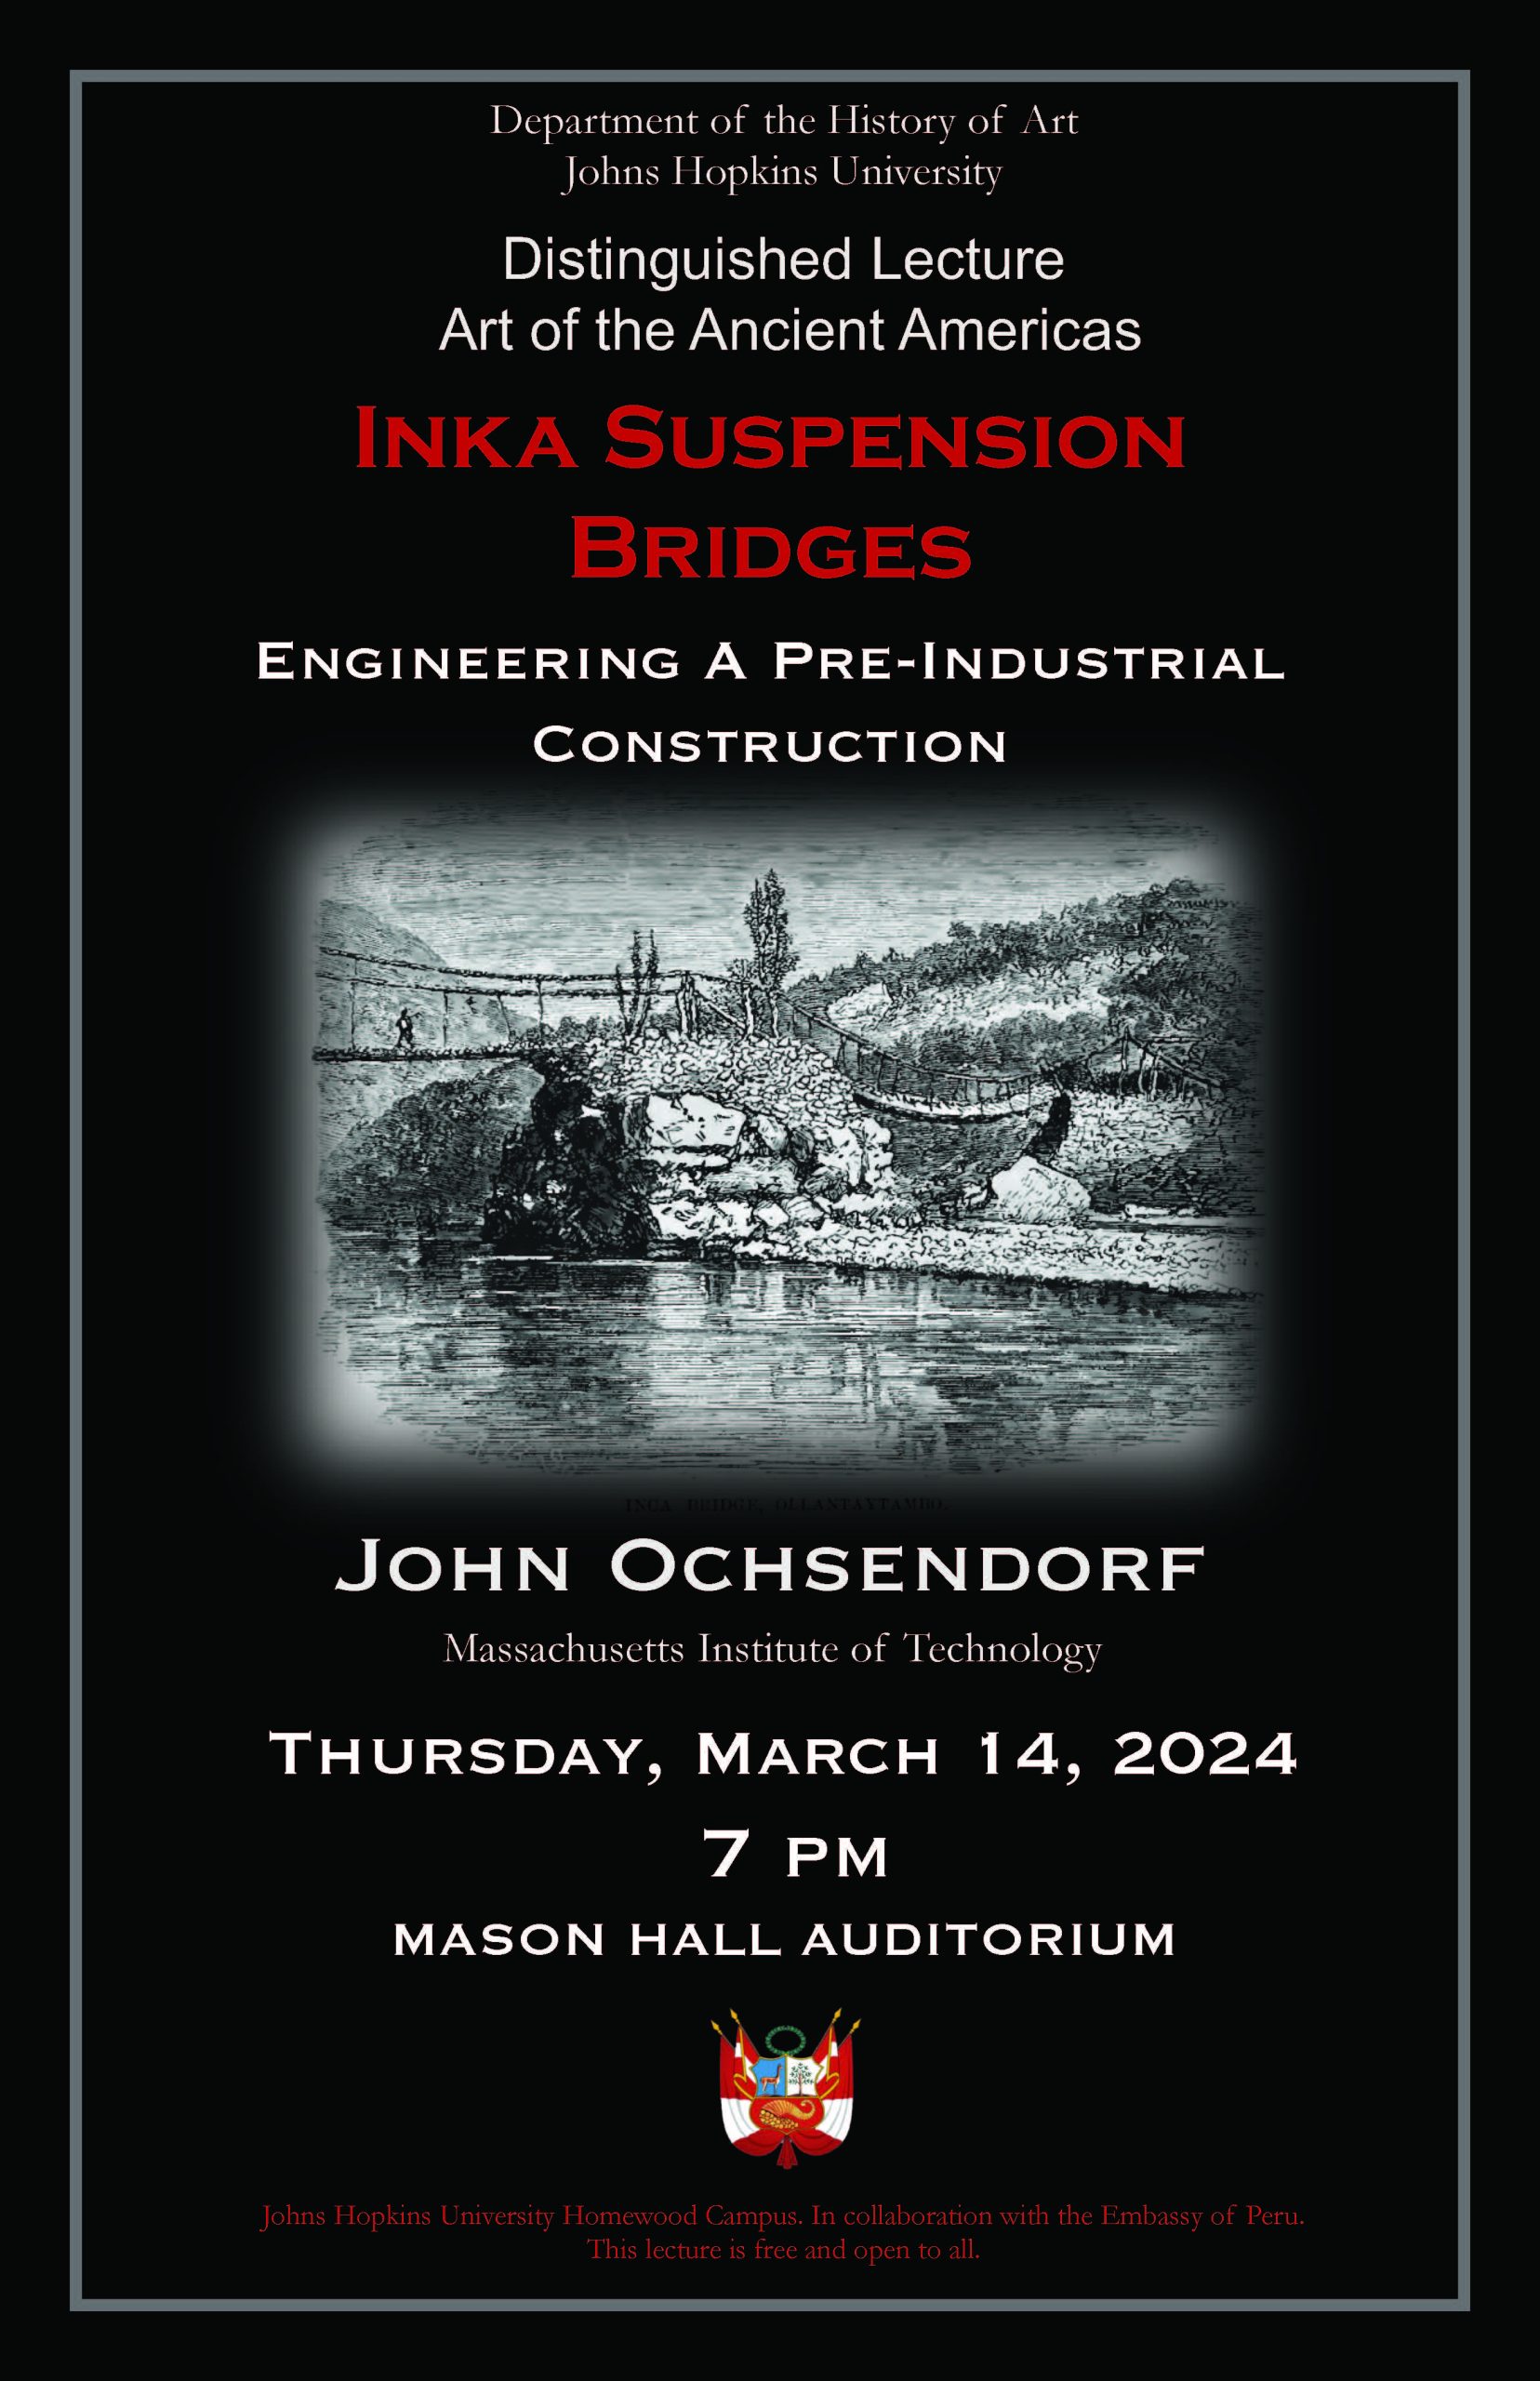 Event flyer The Distinguished Lecture in Art of the Ancient Americas Thursday, March 14, 2024 Inka Suspension Bridges: Engineering A Pre-Industrial Construction John Ochsendorf Massachusetts Institute of Technology